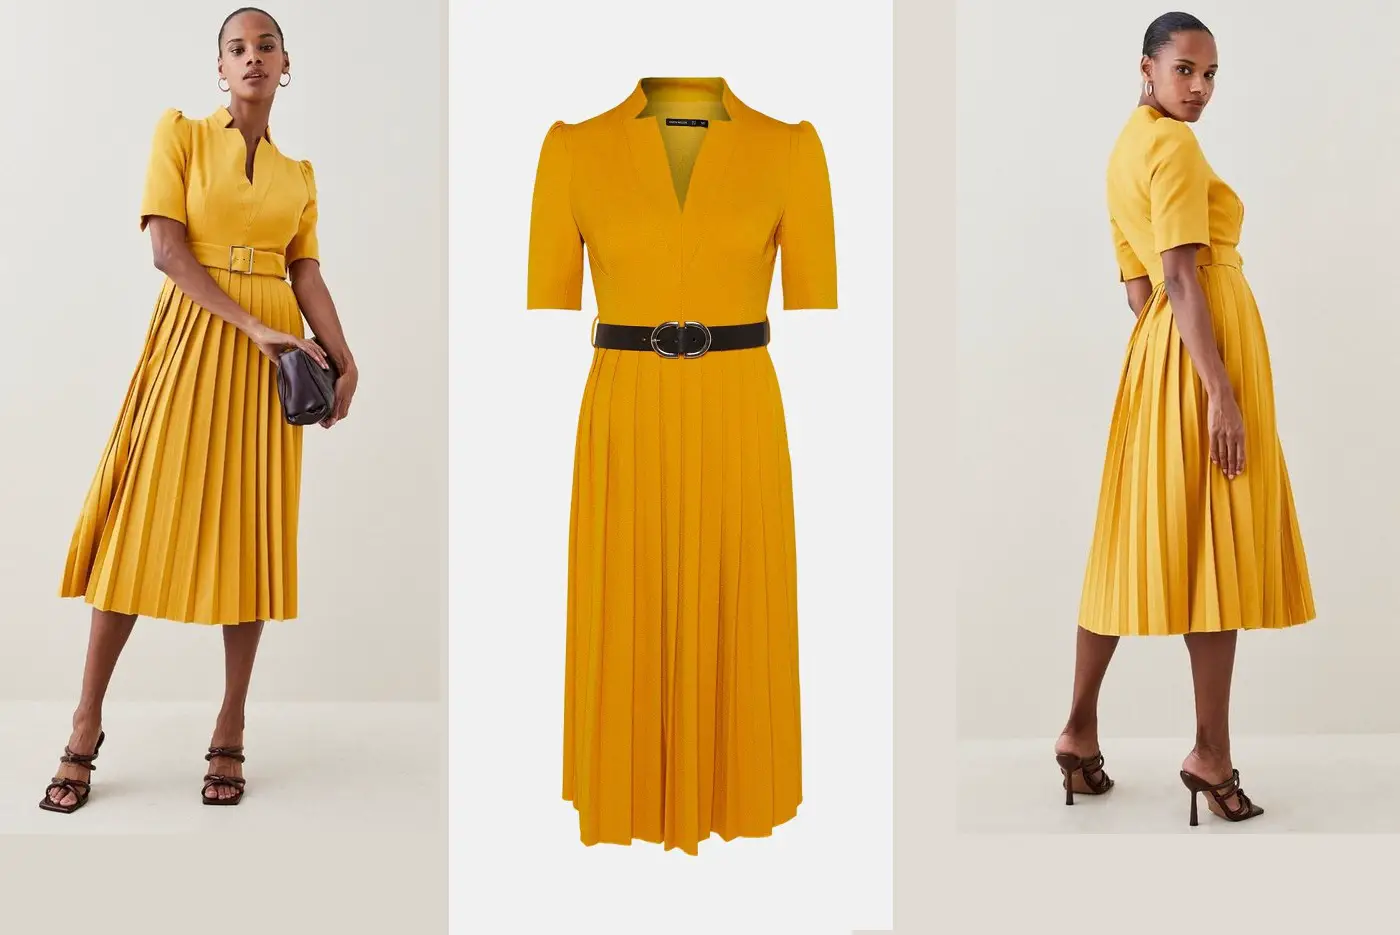 The Princess of Wales wore Karen Millen Structured Crepe Forever Pleat Belted Dress